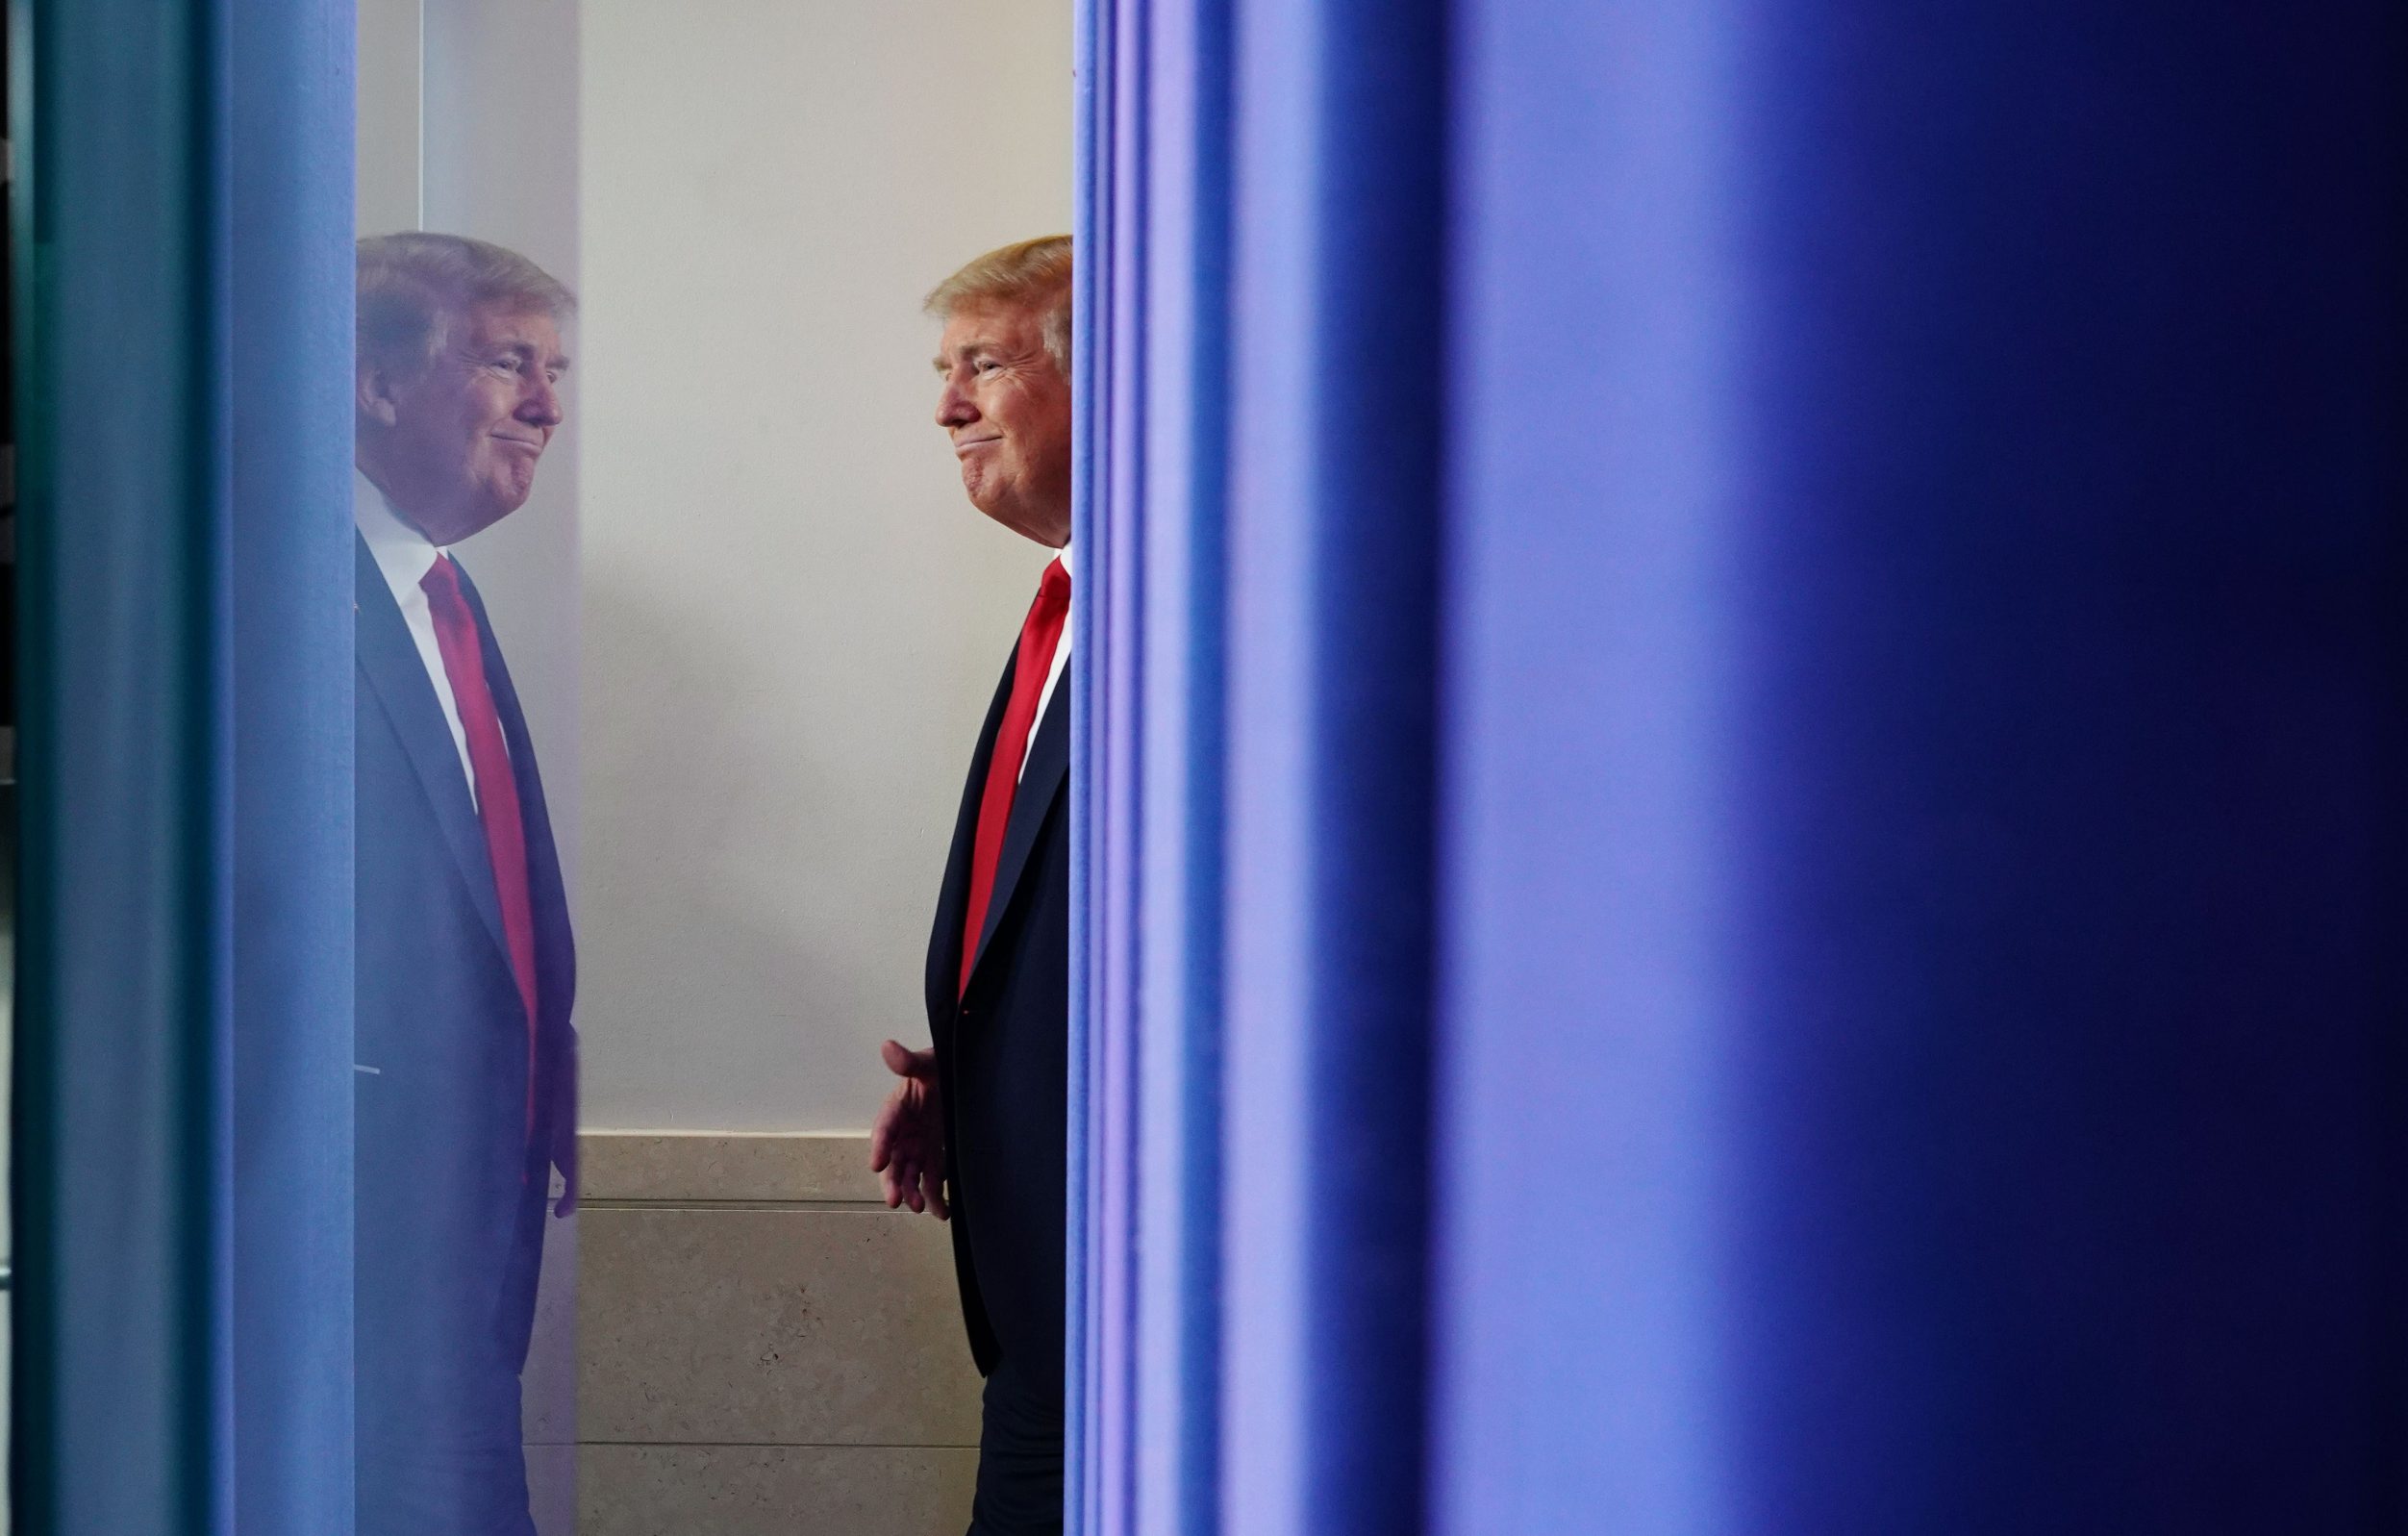 US President Donald Trump arrives for the daily briefing on the novel coronavirus, which causes COVID-19, in the Brady Briefing Room at the White House on April 13, 2020, in Washington, DC. (Photo by MANDEL NGAN / AFP)